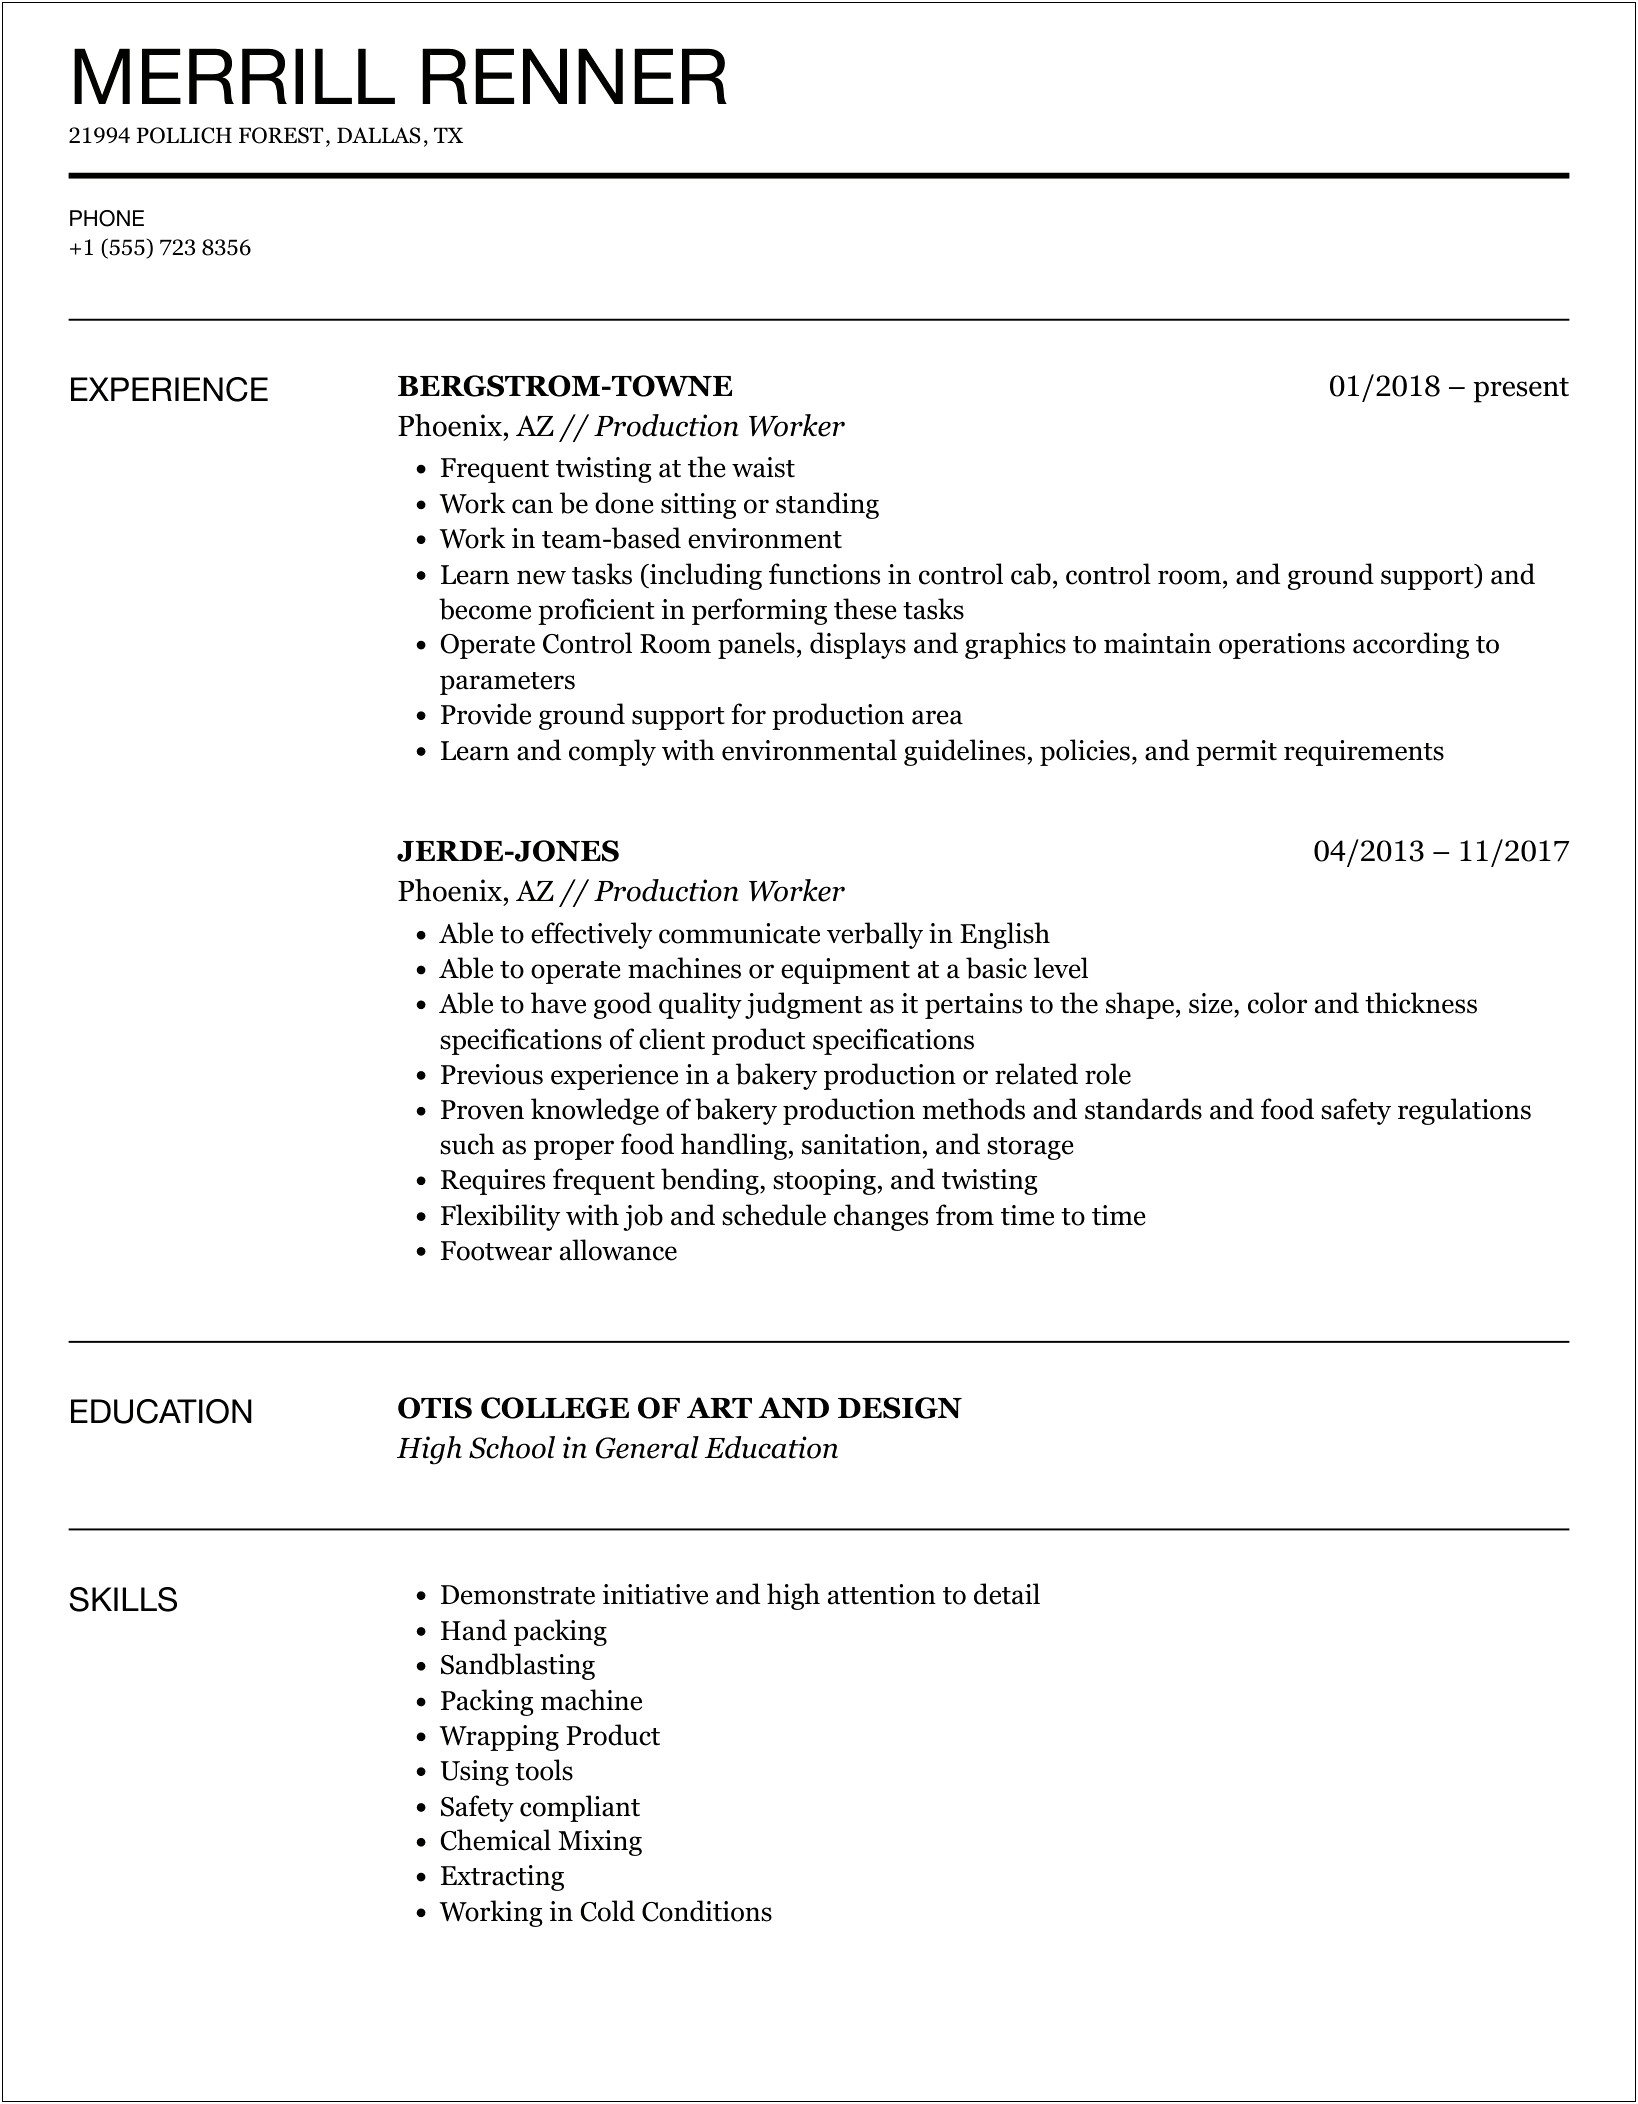 Poultry Production Line Free Resume Template